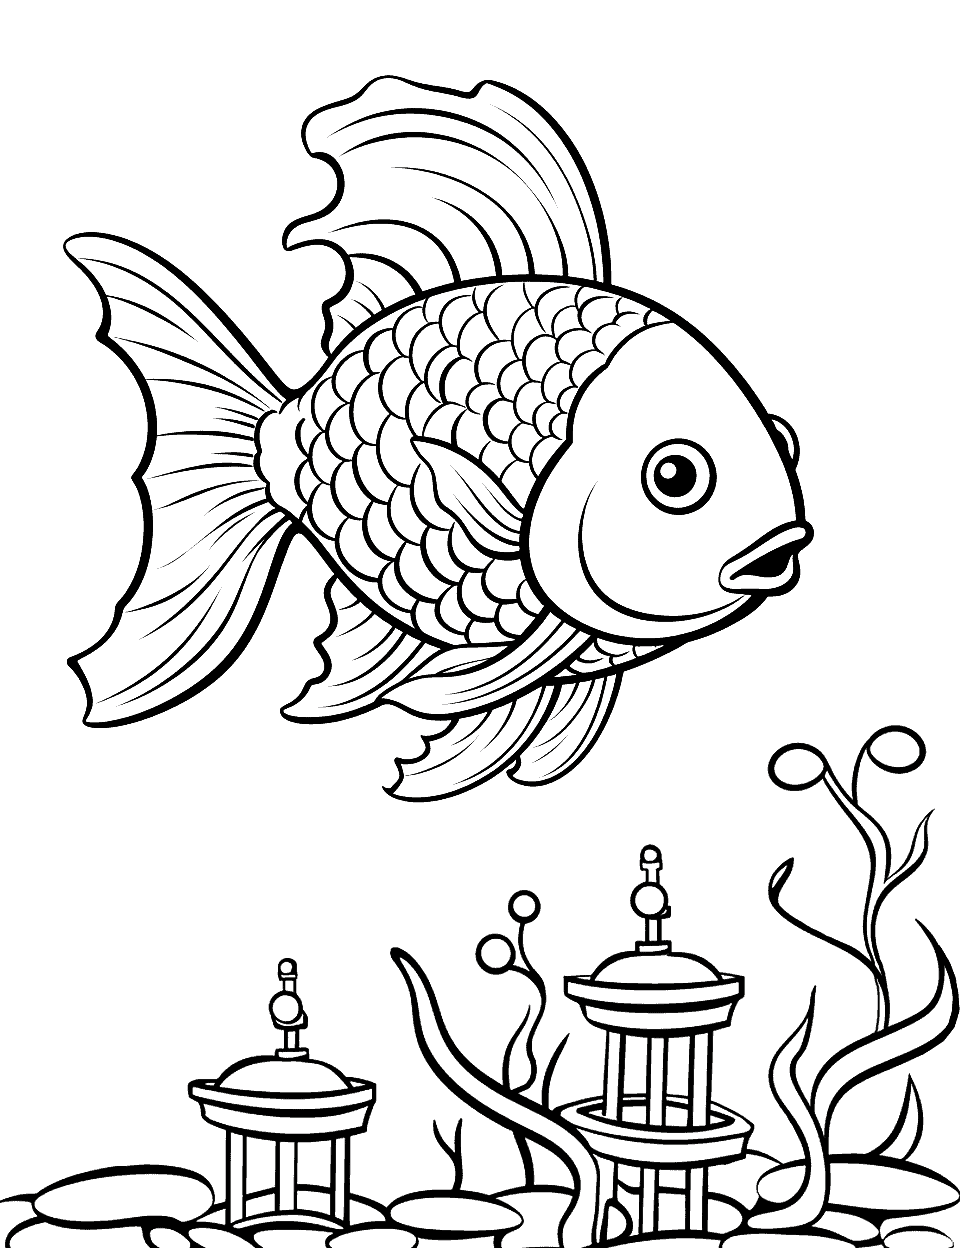 Fish on a Playground Coloring Page - Fish playing in an underwater playground.